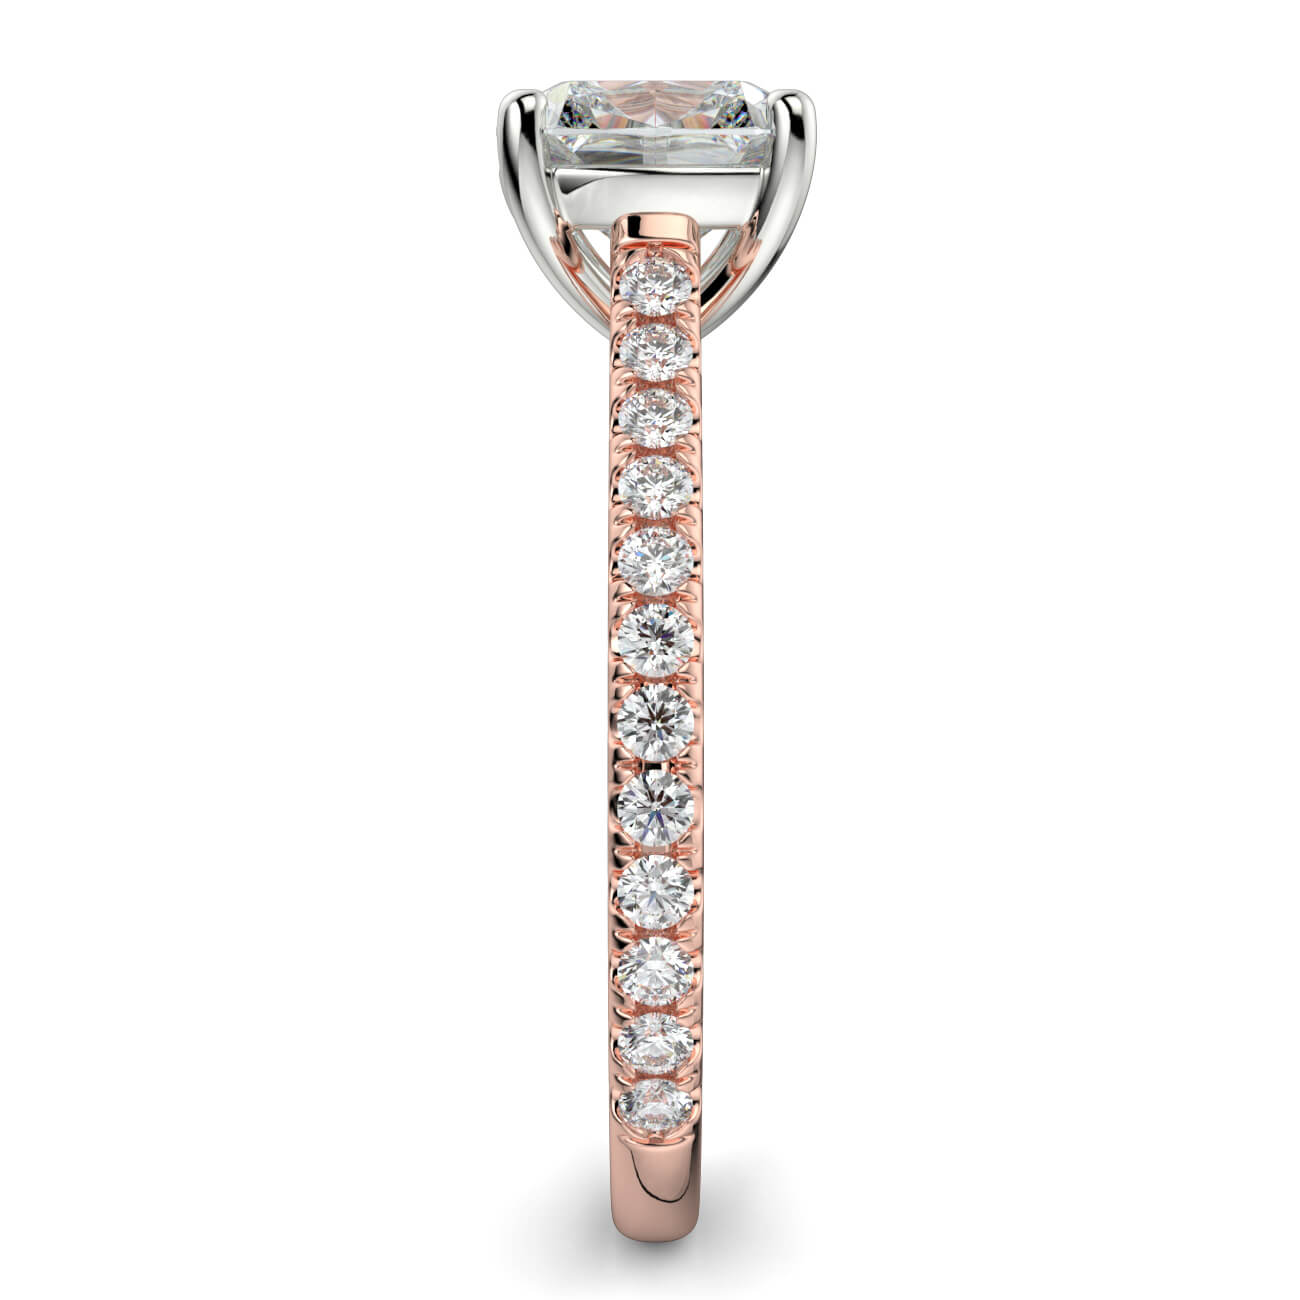 Cushion Cut diamond cathedral engagement ring in rose and white gold – Australian Diamond Network